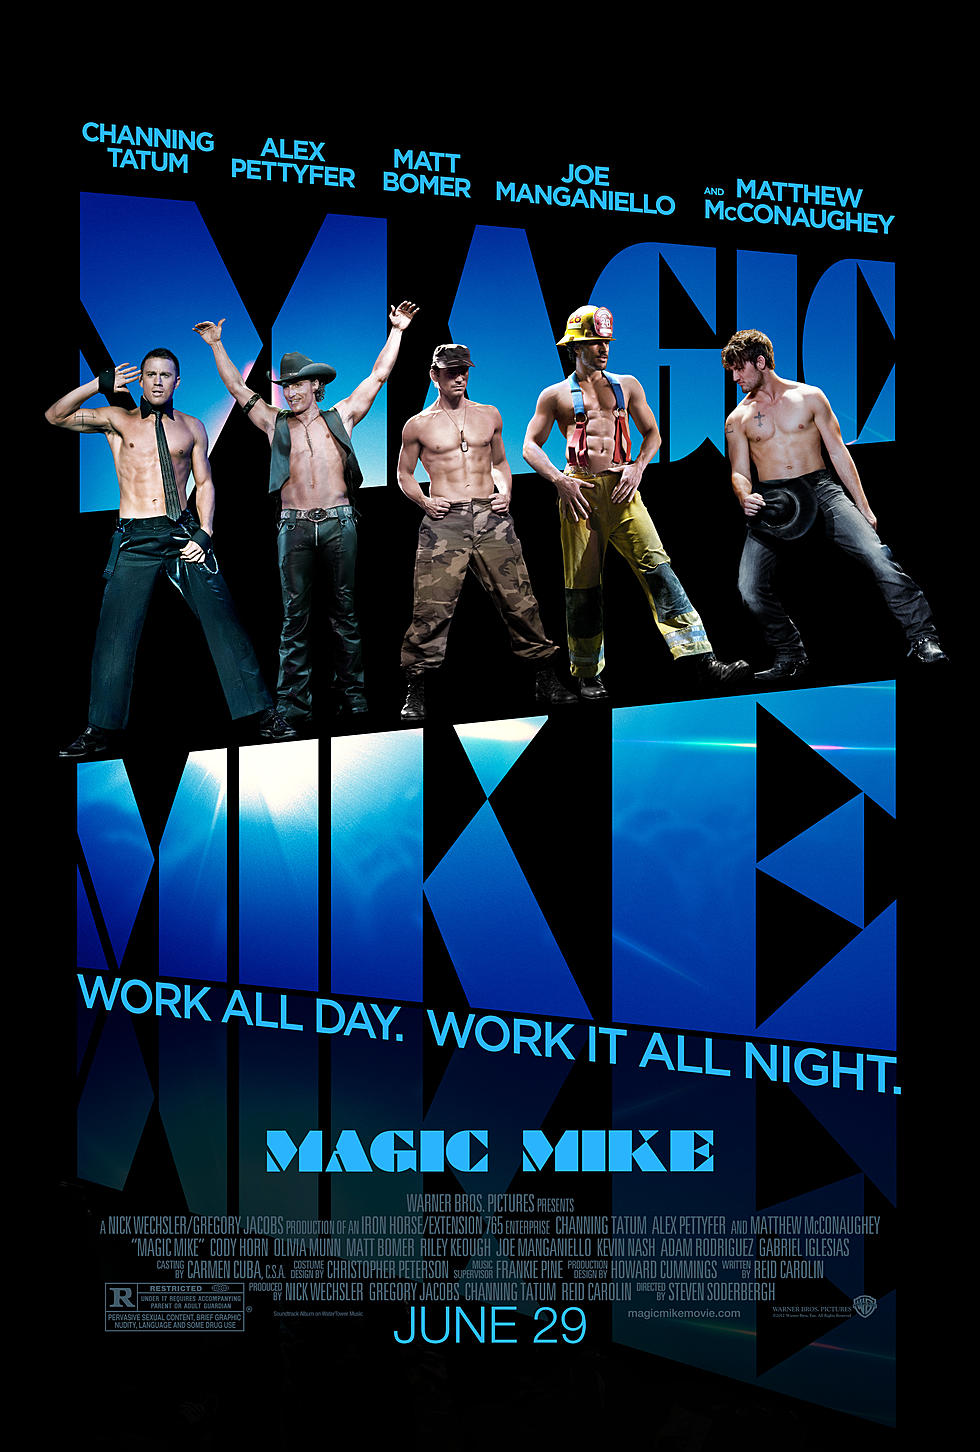 ‘Magic Mike’ Hits Lufkin Theater Friday! [VIDEO]